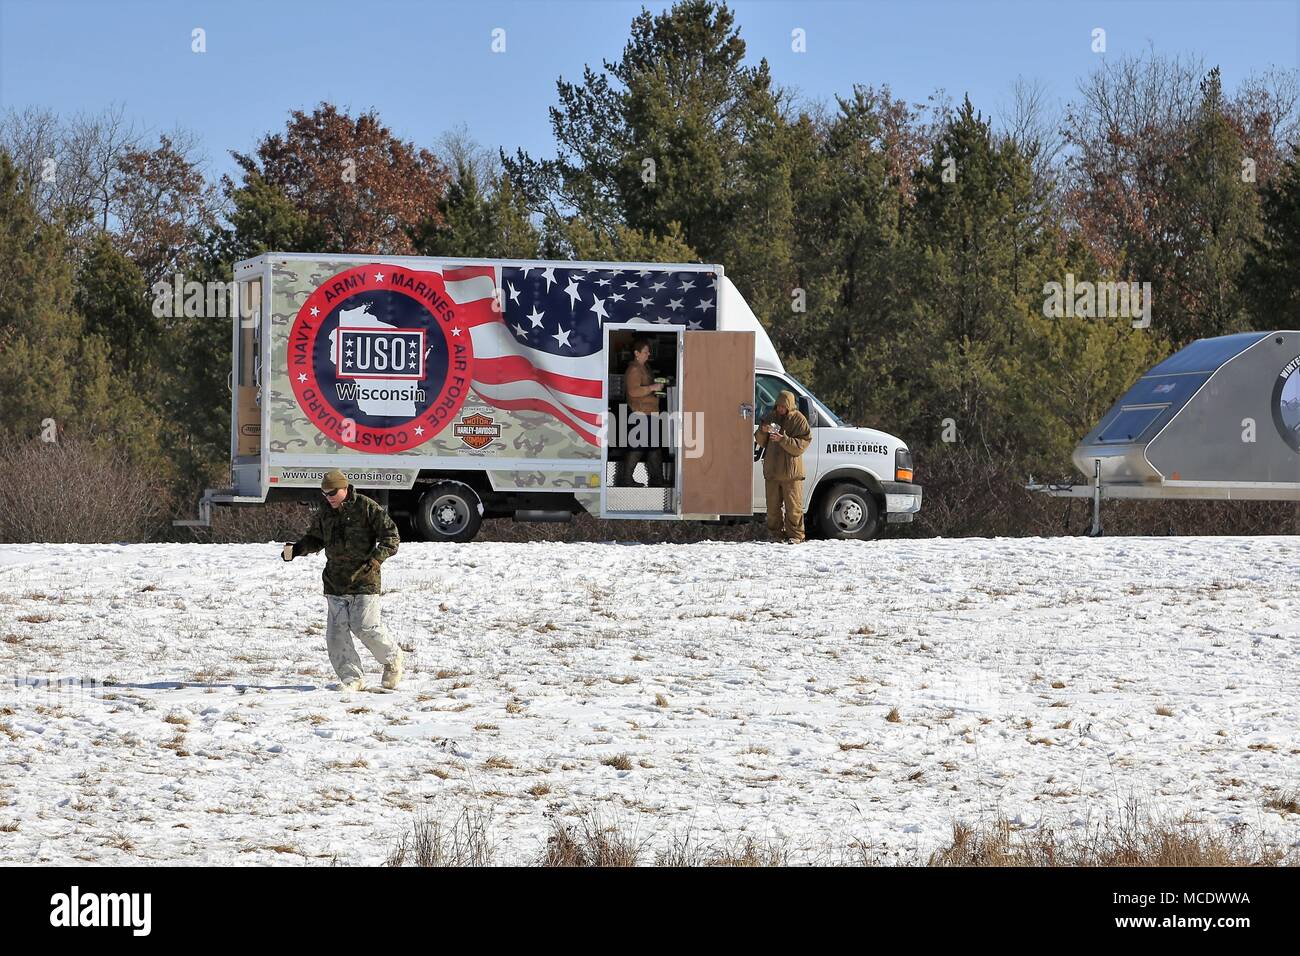 Service members at Fort McCoy, Wis., for training visit a mobile USO Wisconsin station/truck Feb. 14, 2018, on South Post at the installation. USO Wisconsin Inc. is a 501(c)(3) nonprofit organization. It currently operates six centers in Wisconsin that serve more than 25,000 military Families throughout the state. The USO has had a continuous presence in Wisconsin since 1943 through the global parent company, USO Inc. The truck is a recent new addition to USO support at the installation. (U.S. Army Photo by Scott T. Sturkol, Public Affairs Office, Fort McCoy, Wis.) Stock Photo